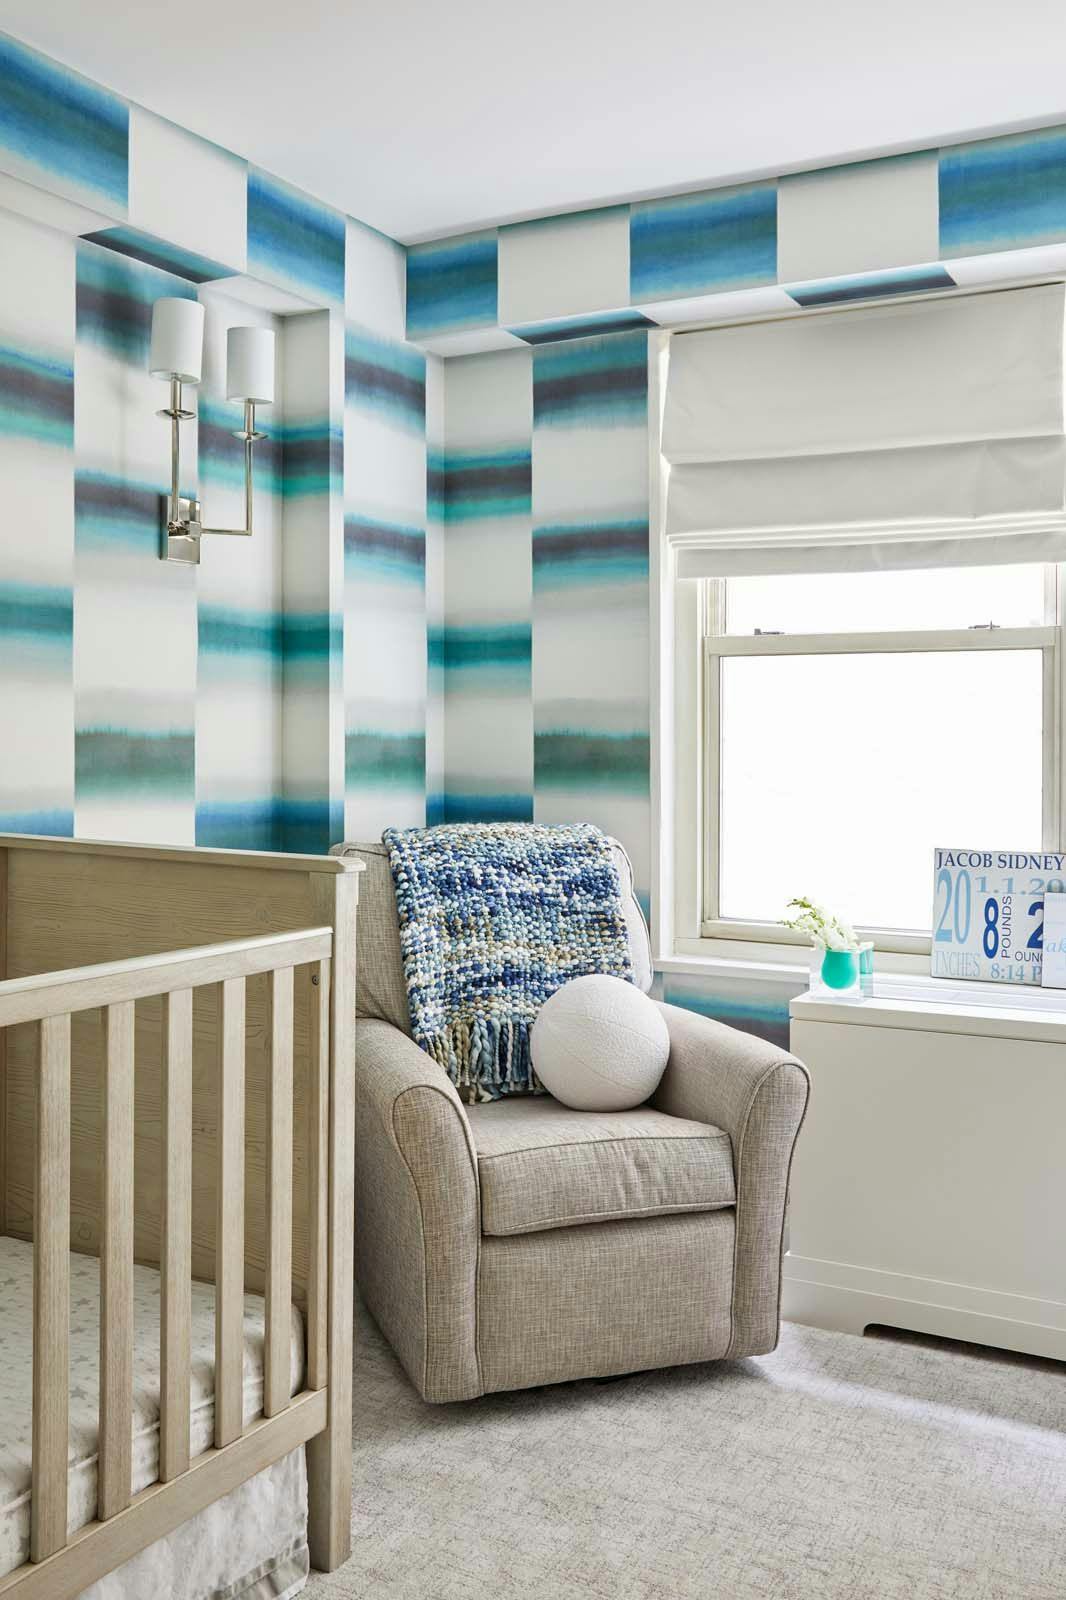 baby's room with ombre style wall treatment and gray couch